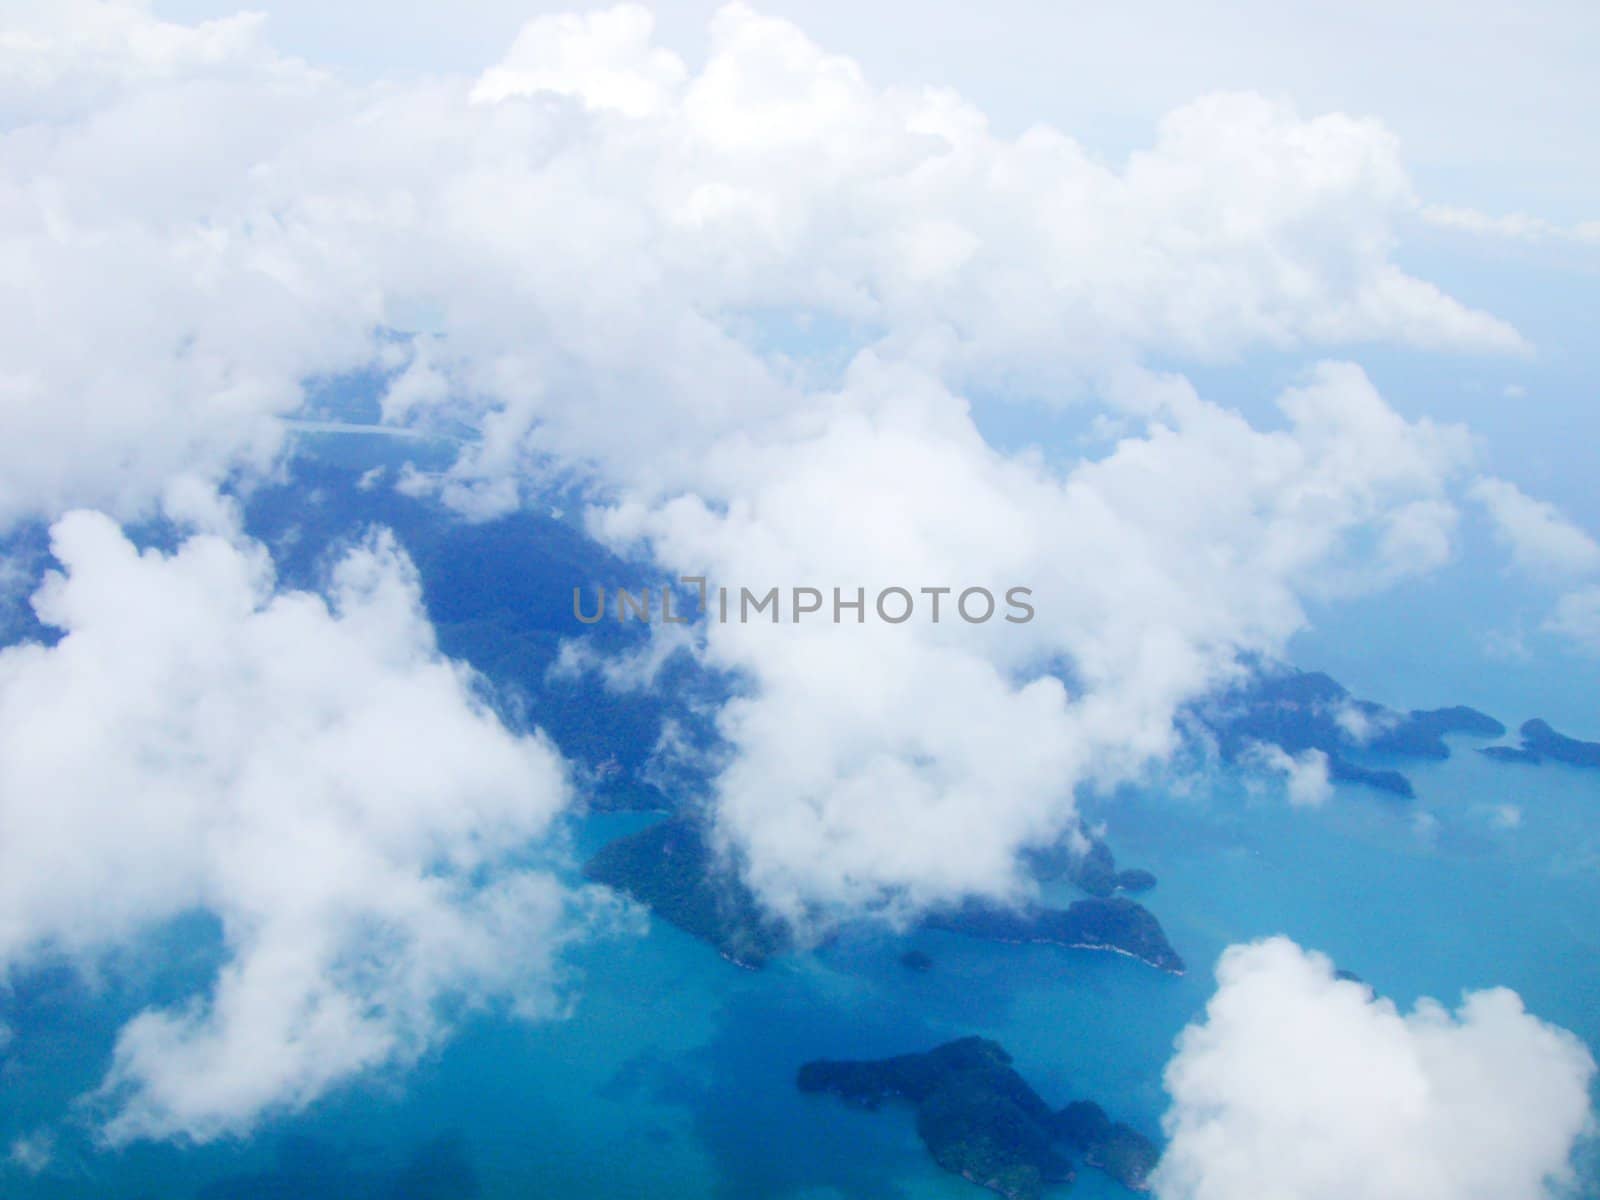 a top view from sky - island, sea, ocean